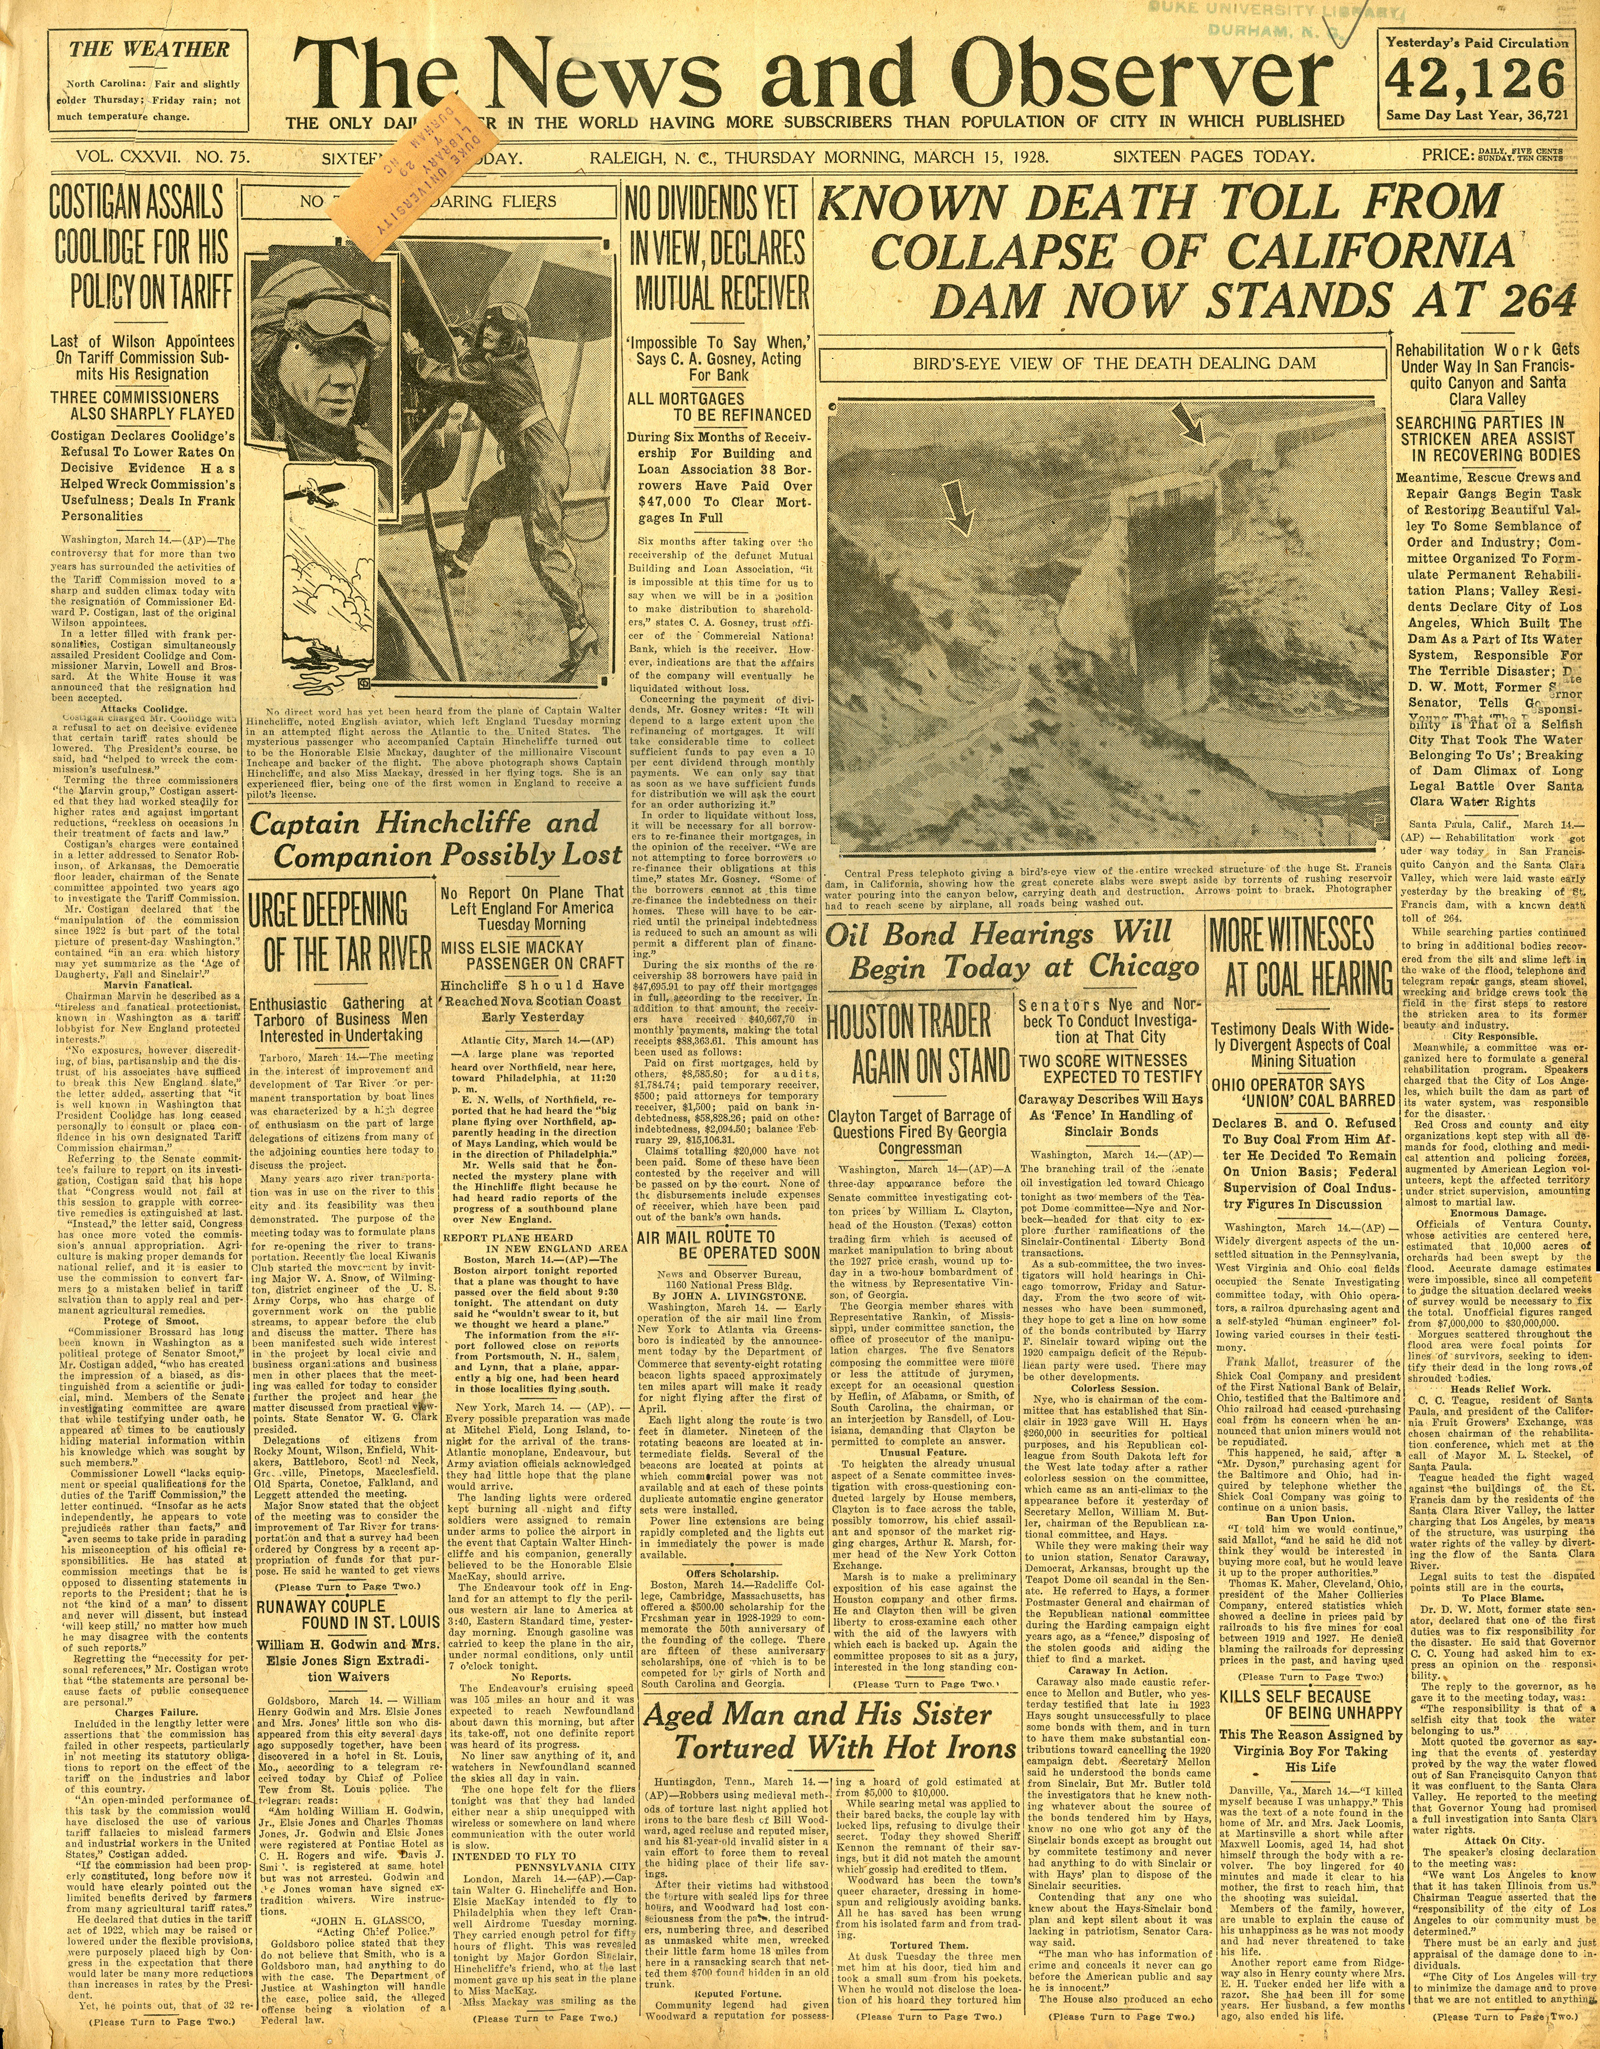 St. Francis Dam Disaster.

THE NEWS AND OBSERVER (NEWSPAPER),

THURSDAY, MARCH 15, 1928